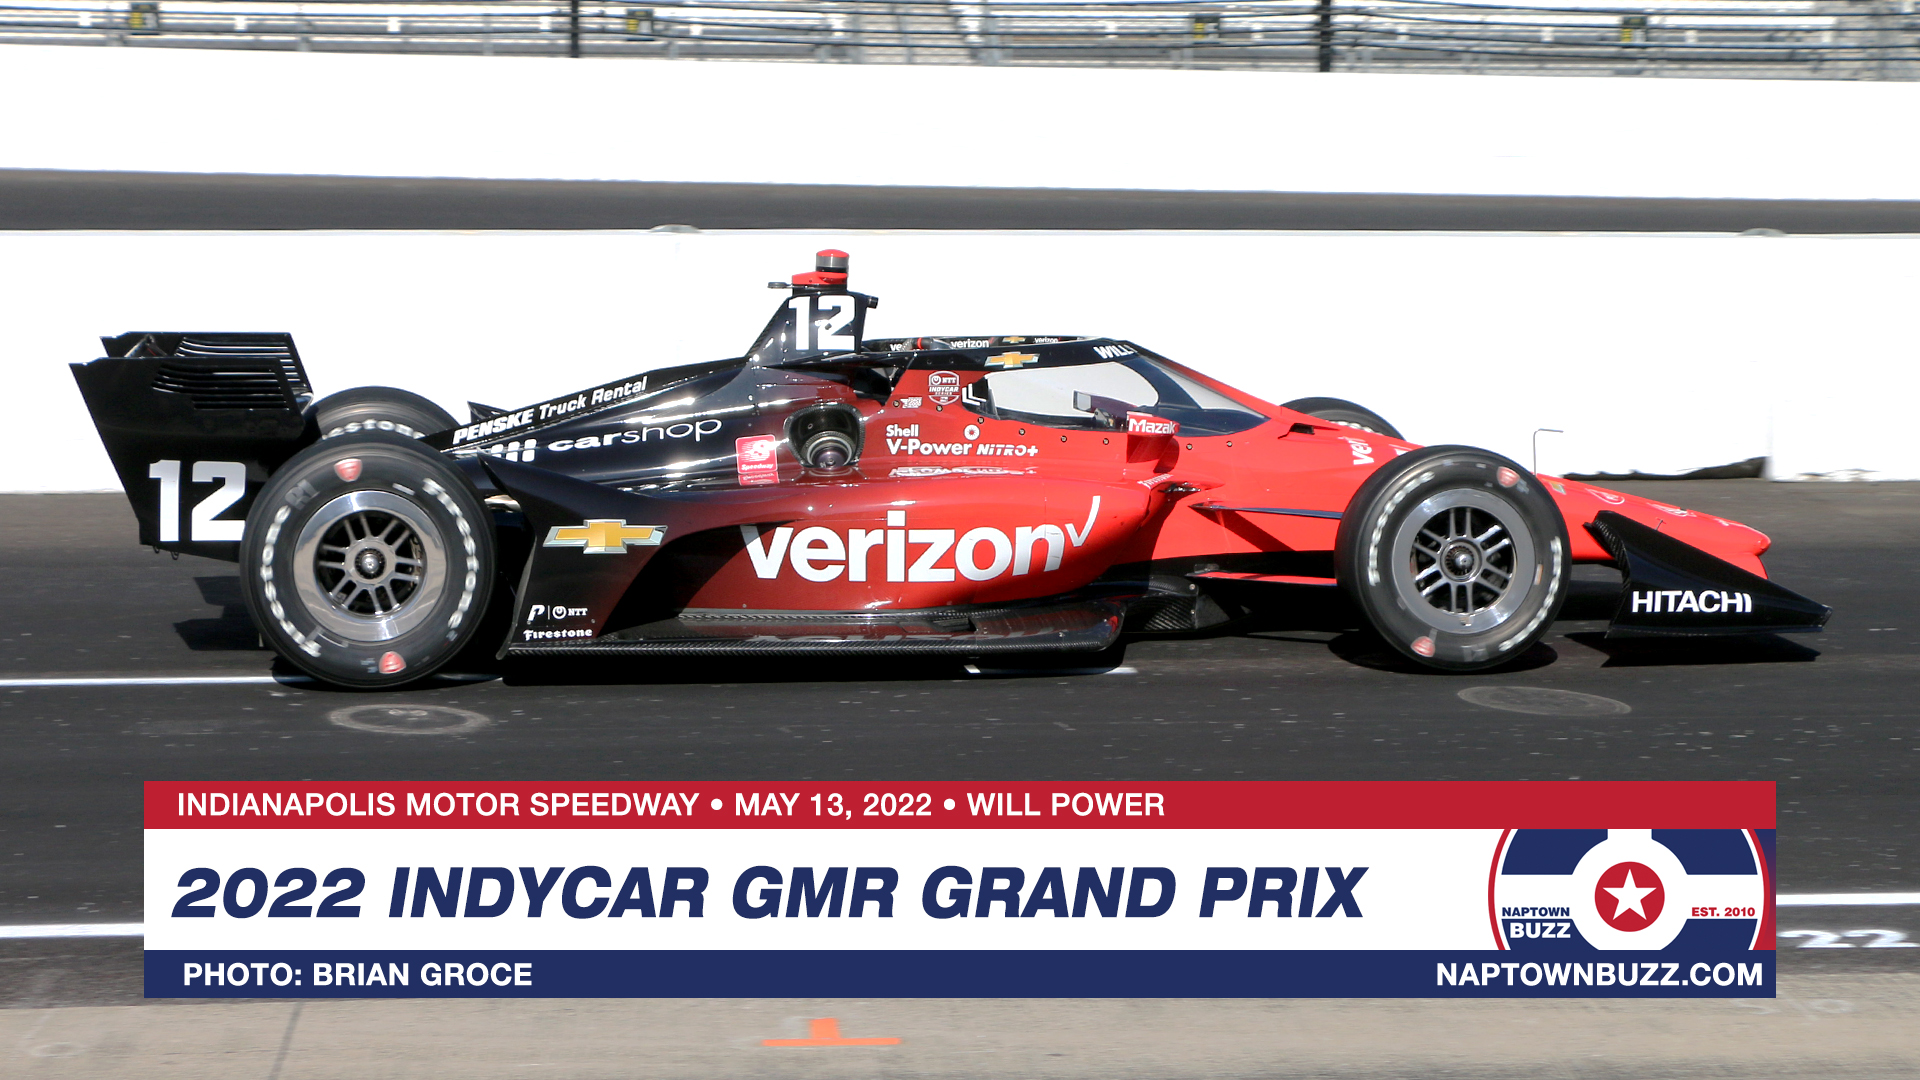 Will Power on May 13, 2022, at Indianapolis Motor Speedway